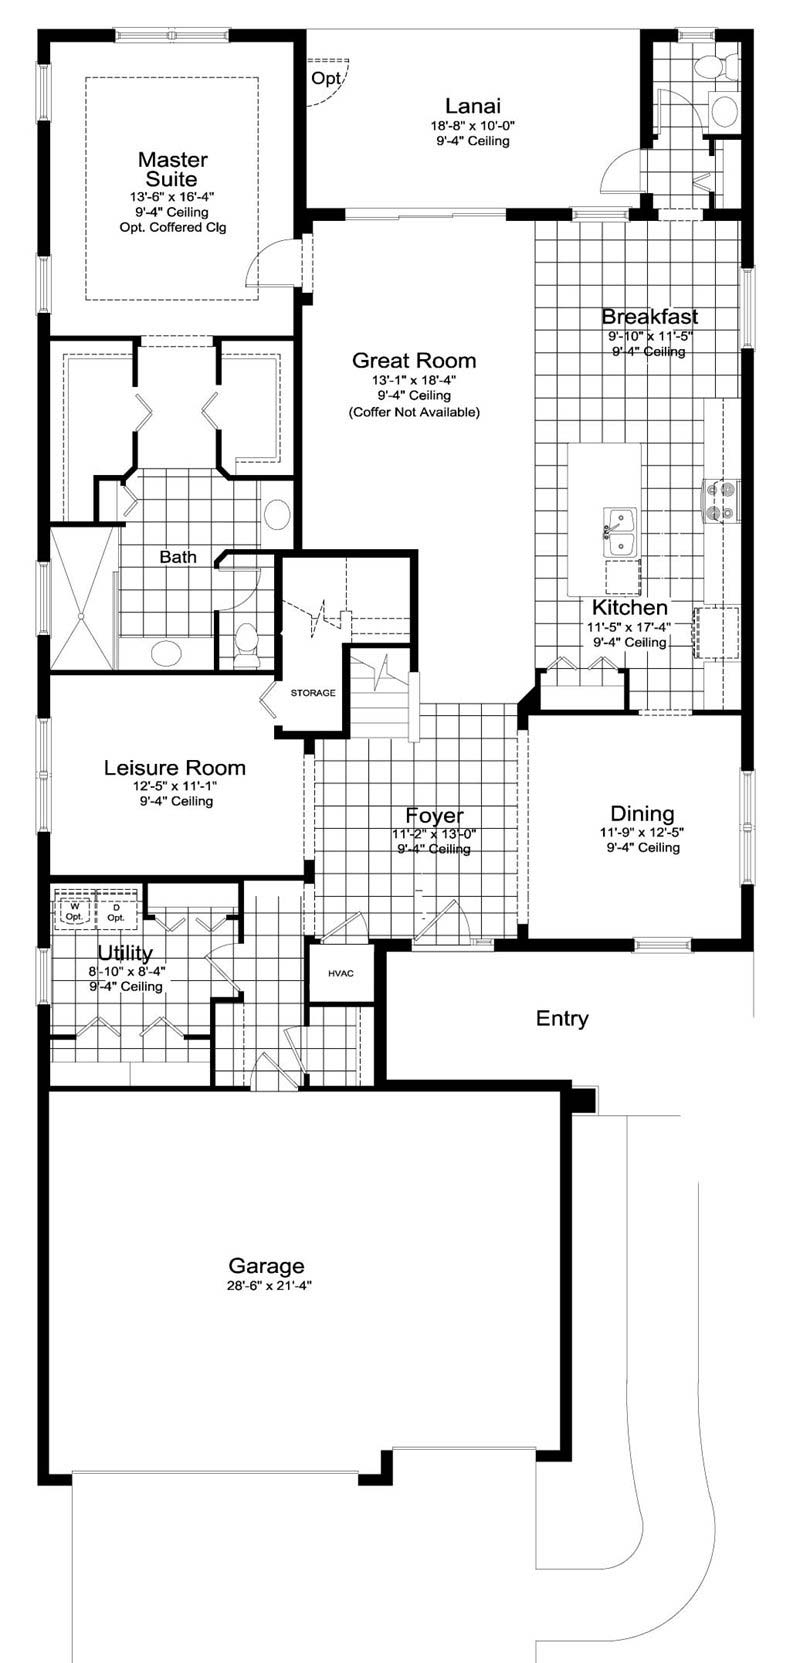 Silver Mist 3 Floor Plan in Coastal Key, Fort Myers by Neal Communities, 4 Bedrooms, 3.5 Bathrooms, 3 Car garage, 2,913 Square feet, 2 Story home